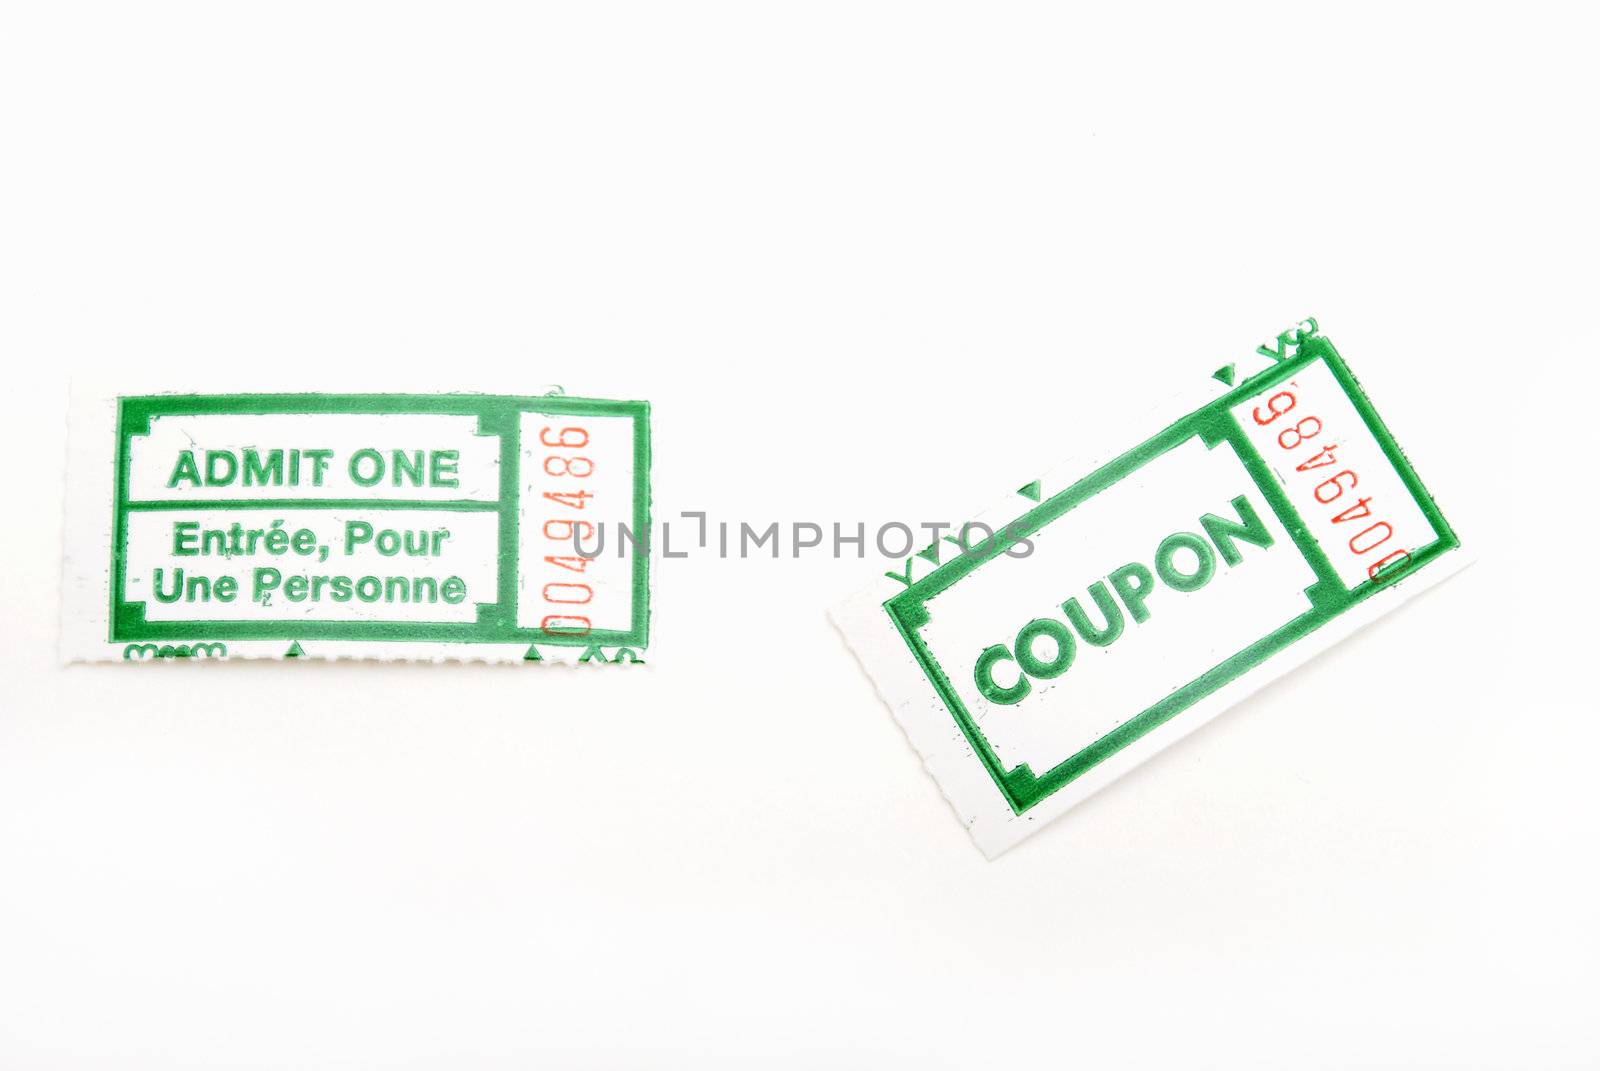 A couple of green ticket stubs on white background.